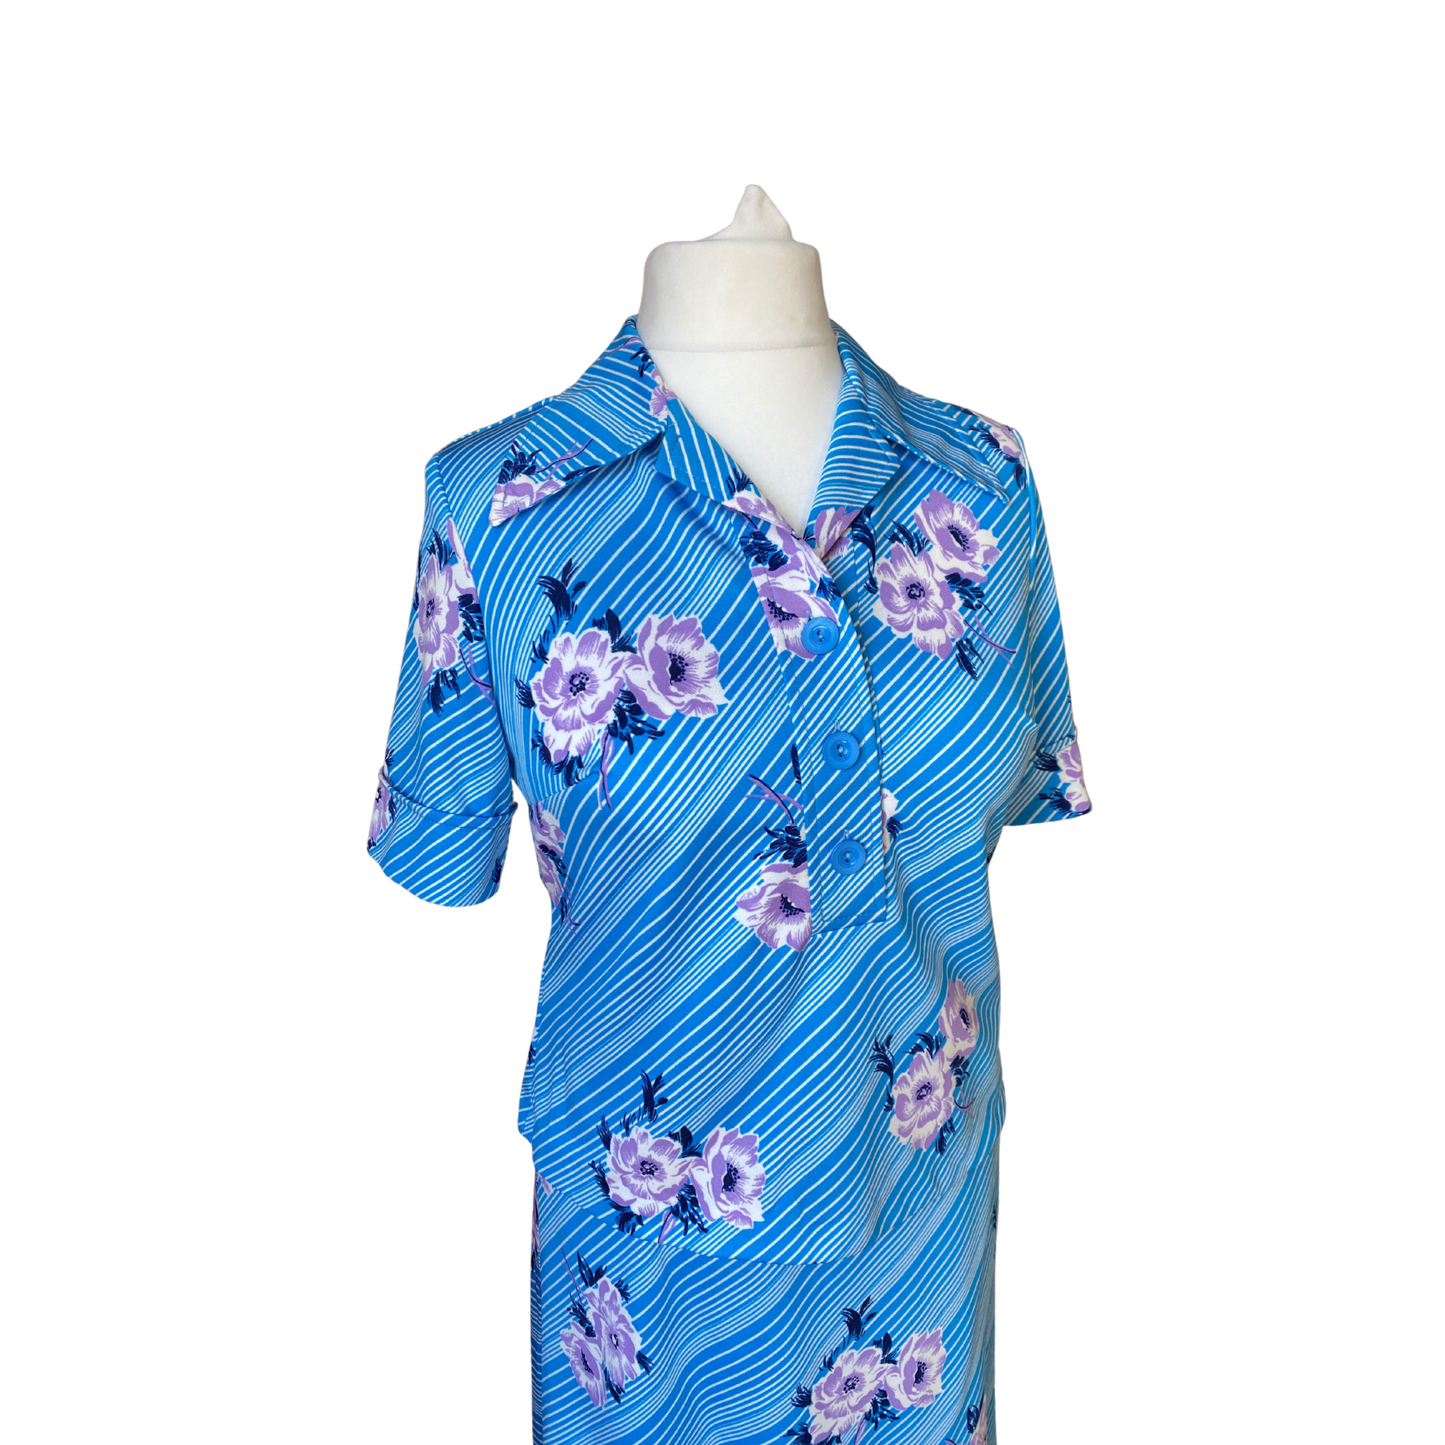 70s Hawaiian style blue and white short sleeved skirt suit /  co ord. Approx  UK size 14 -16